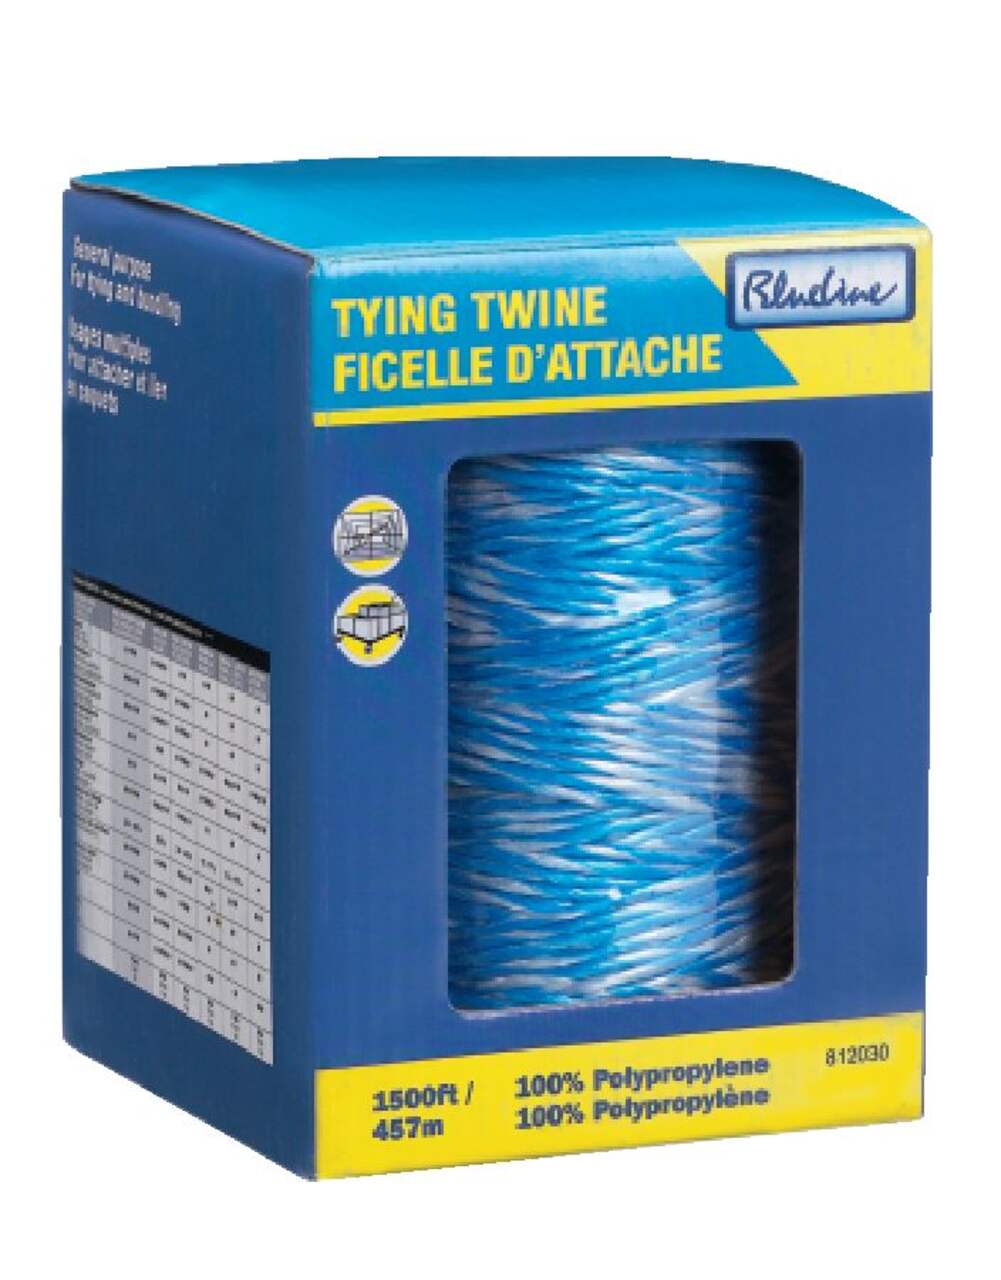 https://media-www.canadiantire.ca/product/fixing/hardware/general-hardware/0618532/white-blue-tying-twine-1500--f934c3de-deaf-407a-bf1b-6906798feaf6-jpgrendition.jpg?imdensity=1&imwidth=1244&impolicy=mZoom